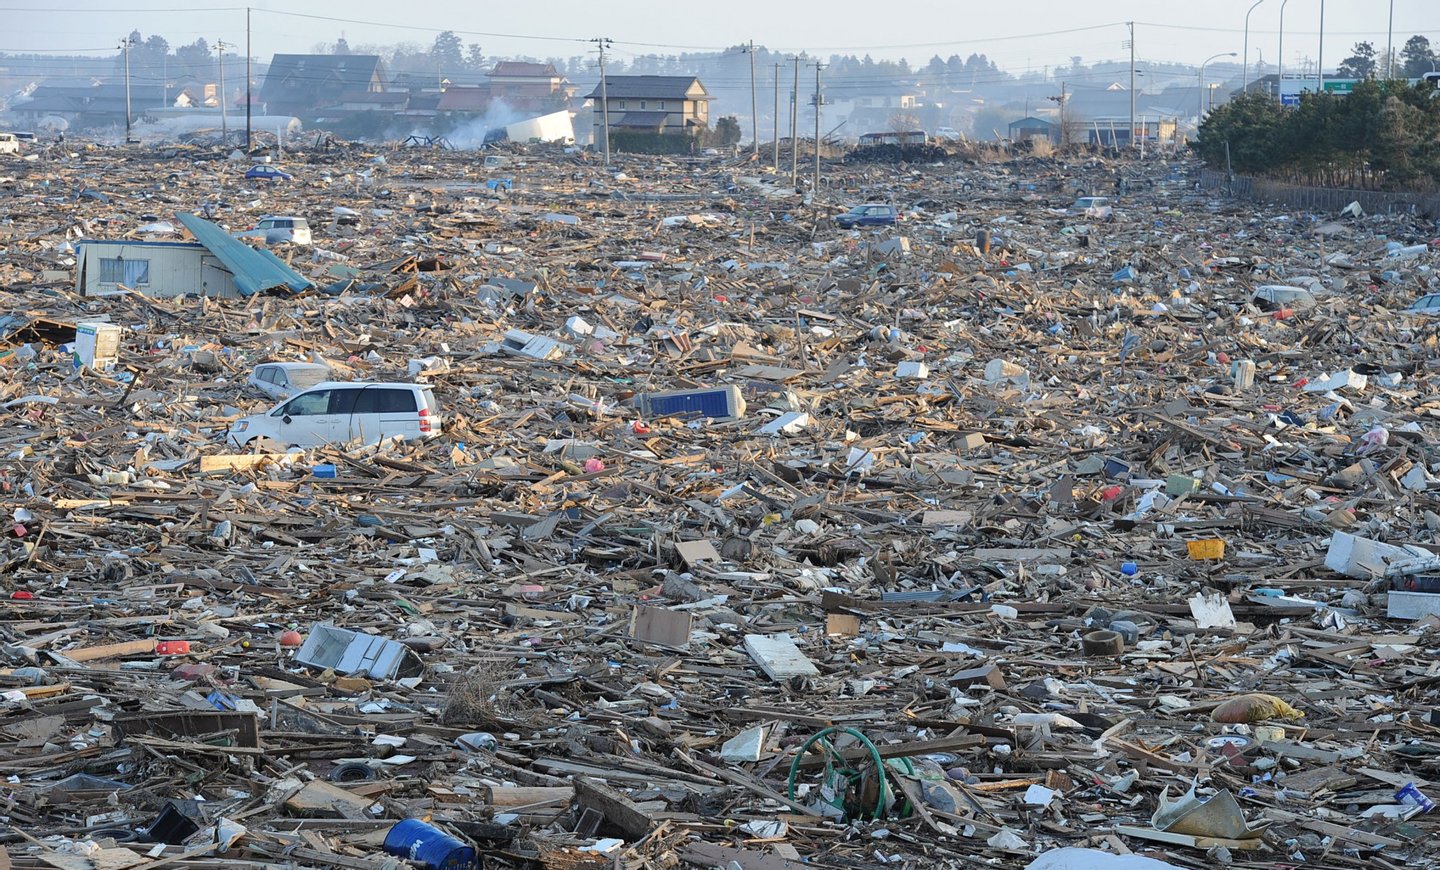 Debris cover a large area in Natori, near Sendai in Miyagi prefecture on March 13, 2011 after the March 11 earthquake and tsunami. Japan battled a feared meltdown of two reactors at a quake-hit nuclear plant, as the full horror of the disaster emerged on the ravaged northeast coast where more than 10,000 were feared dead. An explosion at the ageing Fukushima No. 1 atomic plant blew apart the building housing one of its reactors on March 12, a day after the biggest quake ever recorded in Japan unleashed a monster 10-metre (33-foot) tsunami. AFP PHOTO/MIKE CLARKE (Photo credit should read MIKE CLARKE/AFP/Getty Images)